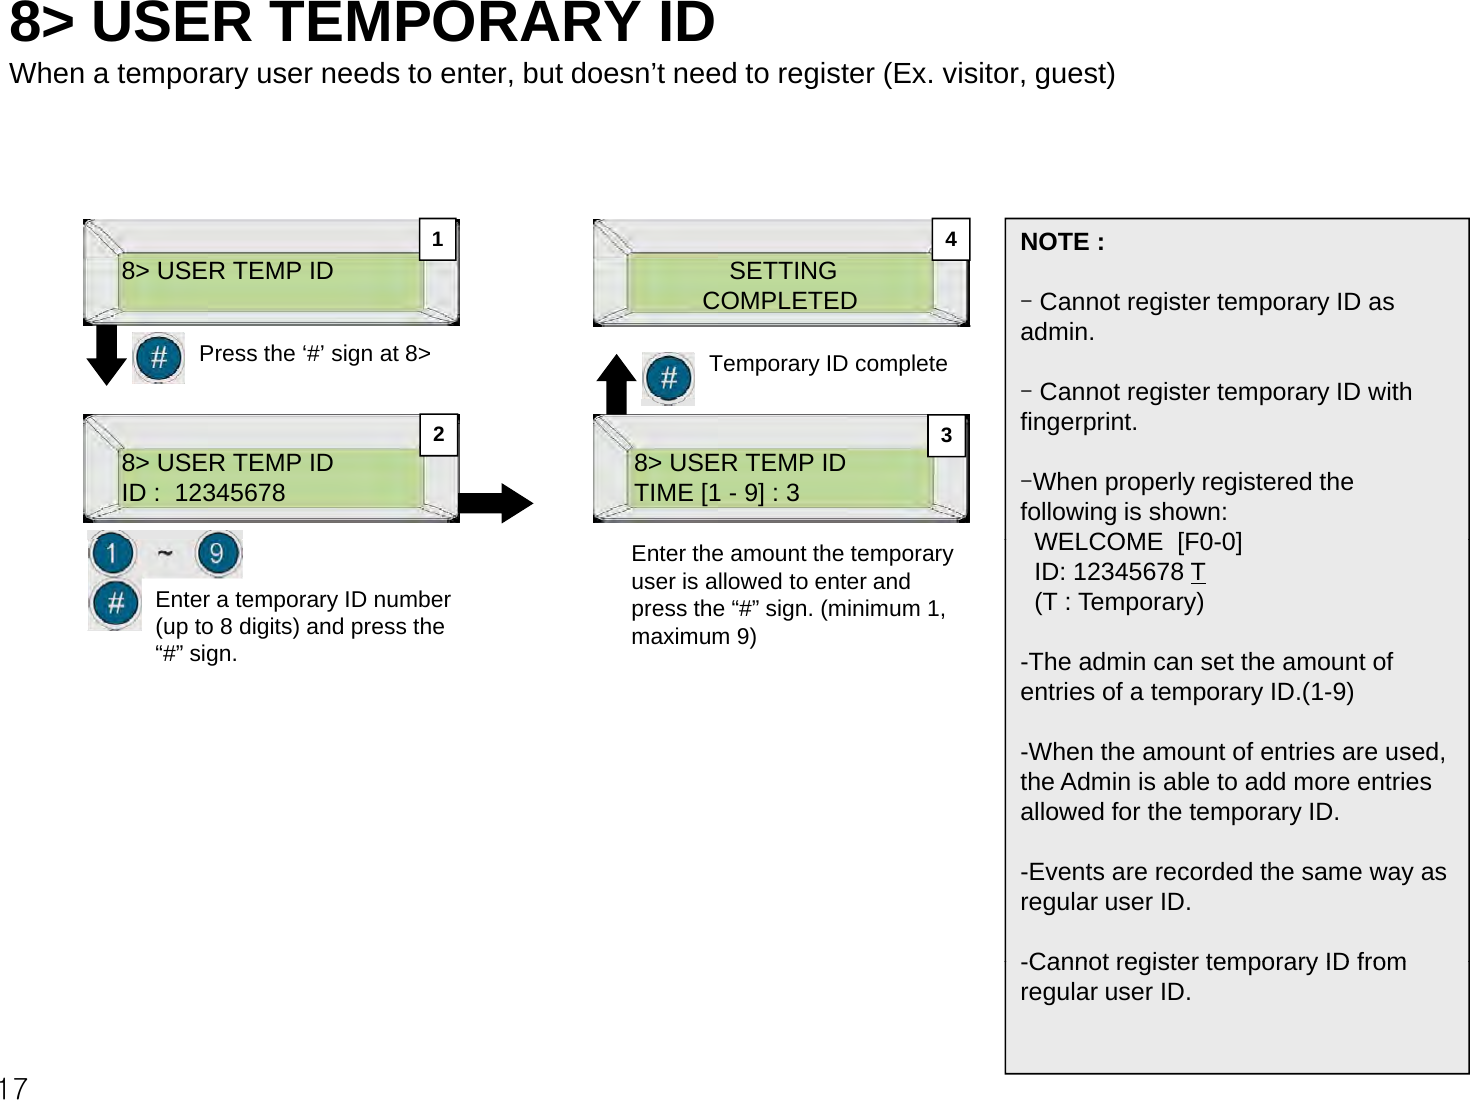 8&gt; USER TEMPORARY ID When a temporary user needs to enter, but doesn’t need to register (Ex. visitor, guest)NOTE :1 48&gt; USER TEMP IDPress the ‘#’ sign at 8&gt;SETTINGCOMPLETEDTemporary ID complete-Cannot register temporary ID as admin.-Cannot register temporary ID with8&gt; USER TEMP IDID :  12345678 8&gt; USER TEMP IDTIME [1 - 9] : 3Cannot register temporary ID with fingerprint.-When properly registered the following is shown:WELCOME [F00]23Enter a temporary ID number (up to 8 digits) and press the “#” sign.Enter the amount the temporary user is allowed to enter and press the “#” sign. (minimum 1, maximum 9)WELCOME  [F0-0]ID: 12345678 T(T : Temporary)-The admin can set the amount of entries of a temporary ID.(1-9)-When the amount of entries are used, the Admin is able to add more entries allowed for the temporary ID.py-Events are recorded the same way as regular user ID.Cannot register temporary ID from17-Cannot register temporary ID from regular user ID.